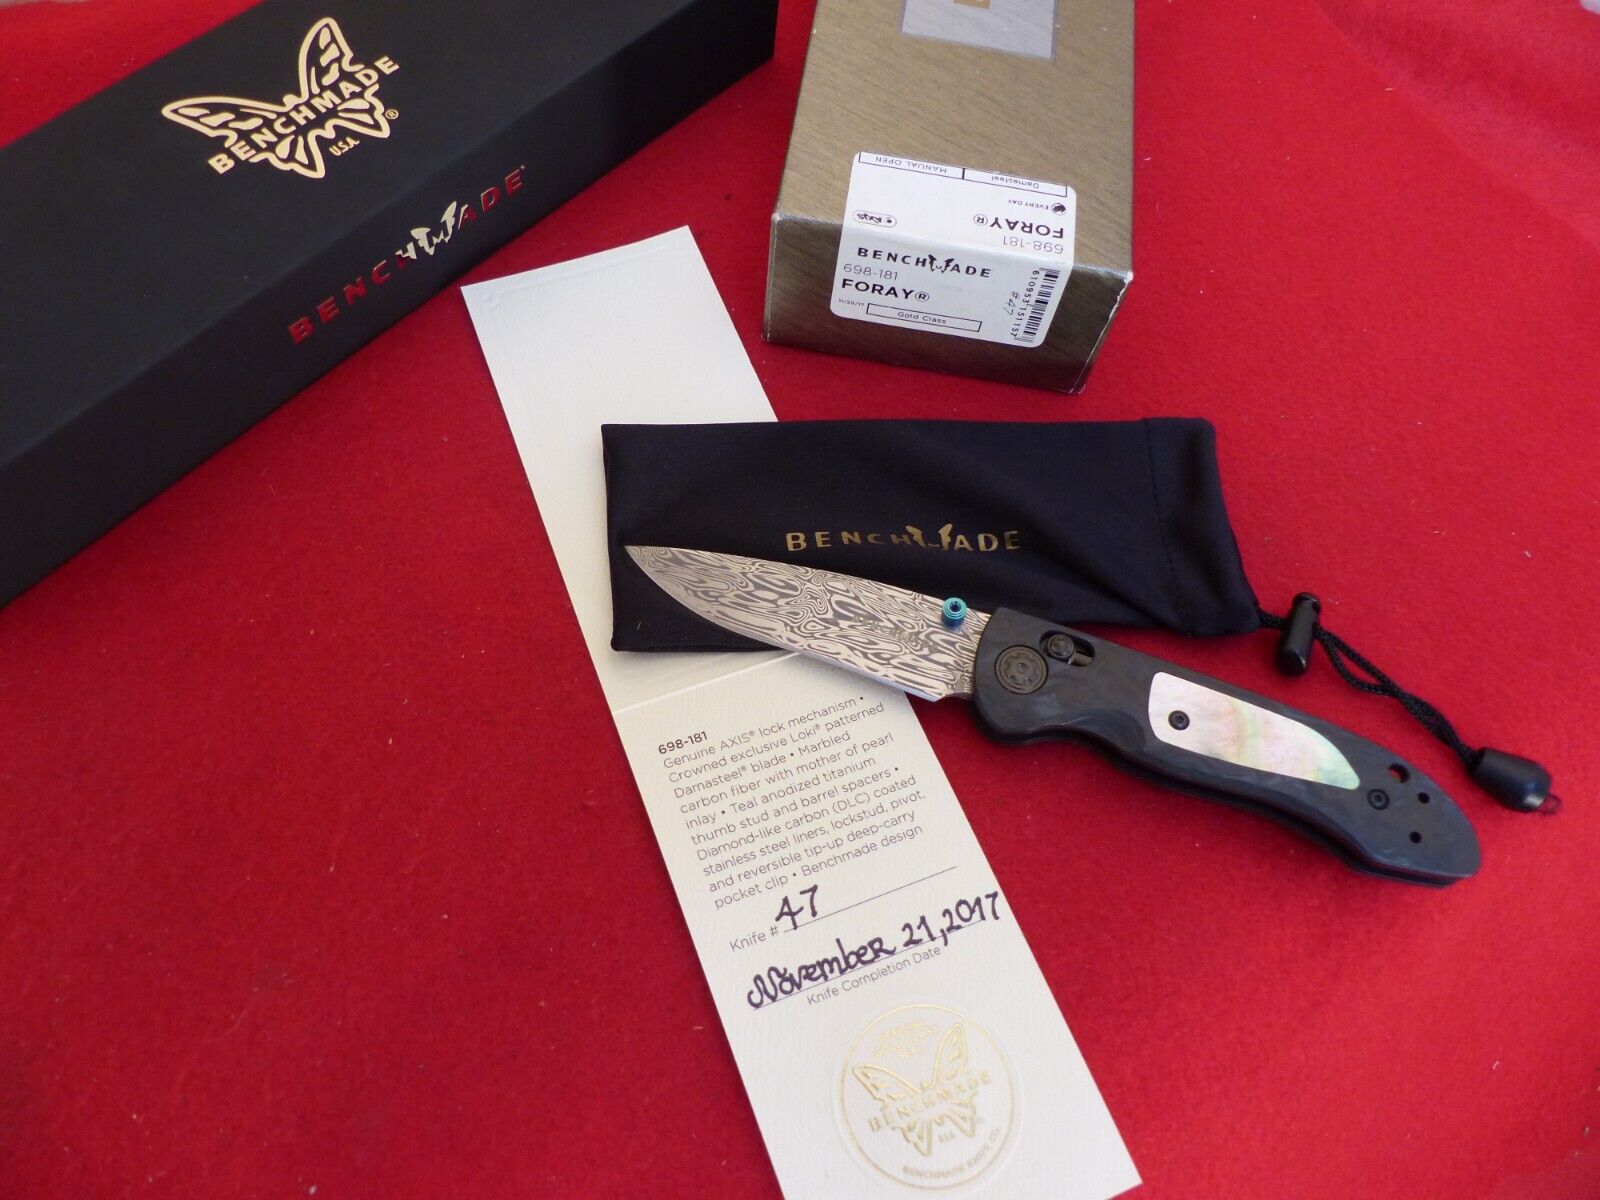 Benchmade 698-181 Foray GOLD CLASS LIMITED EDITION RARE DISCONTINUED knife